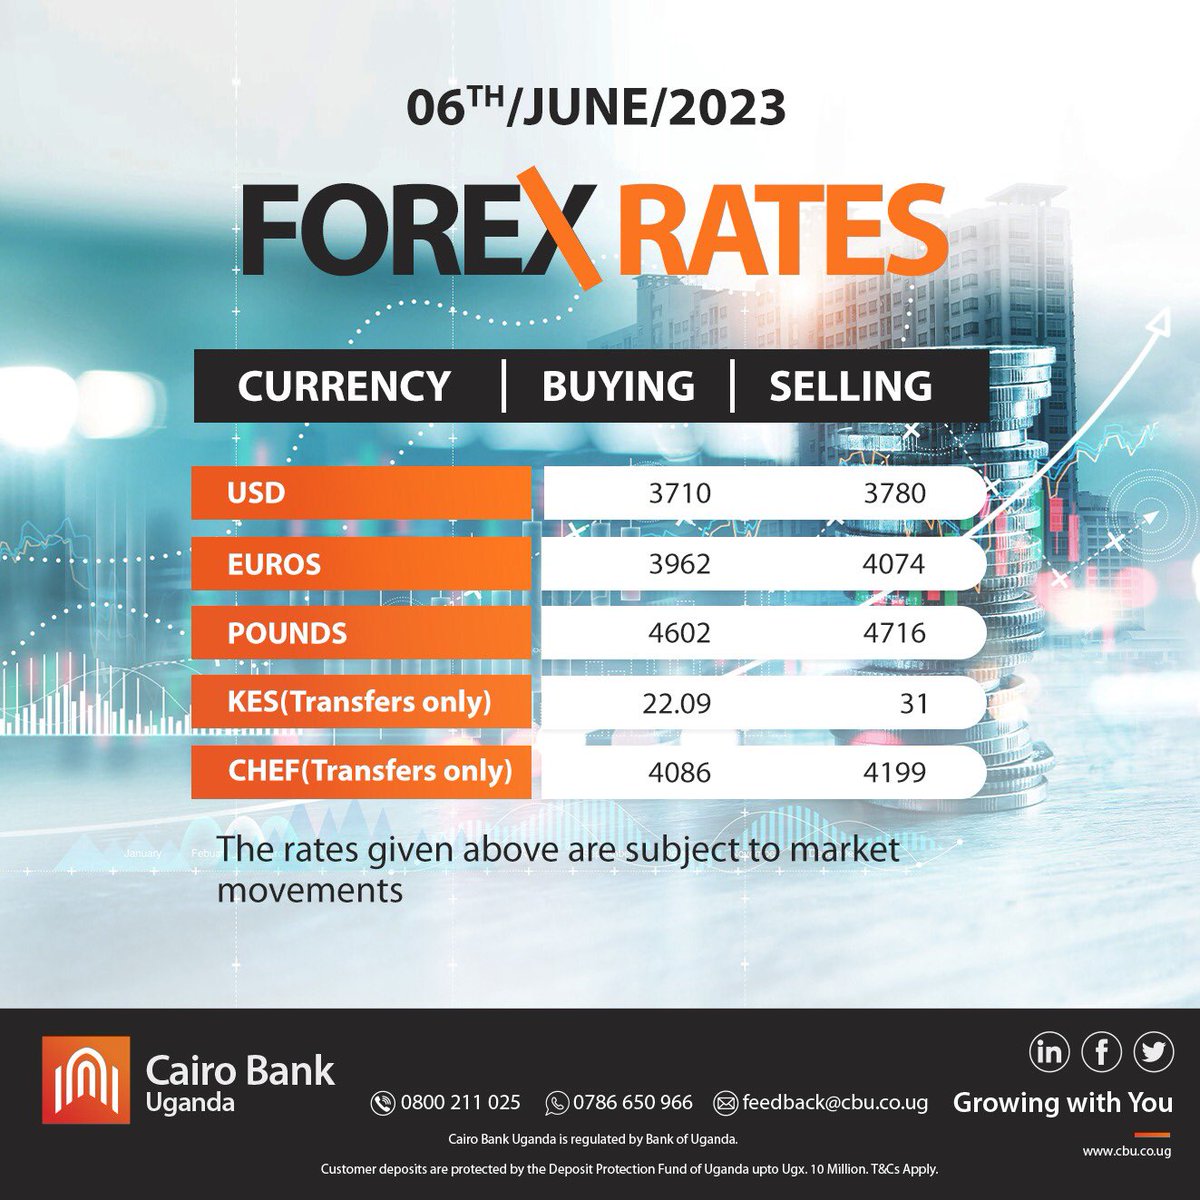 Forex Rates | 06 June, 2023

⚠️ Rates given are subject to market movements❗️

#CairoBanks #ForexRates #Money #MoneyMatters #MoneyInTheBank #Rates #Forex #ForexBanking #MoneyExchange #commerce #MoneyTalks #MoneyTips